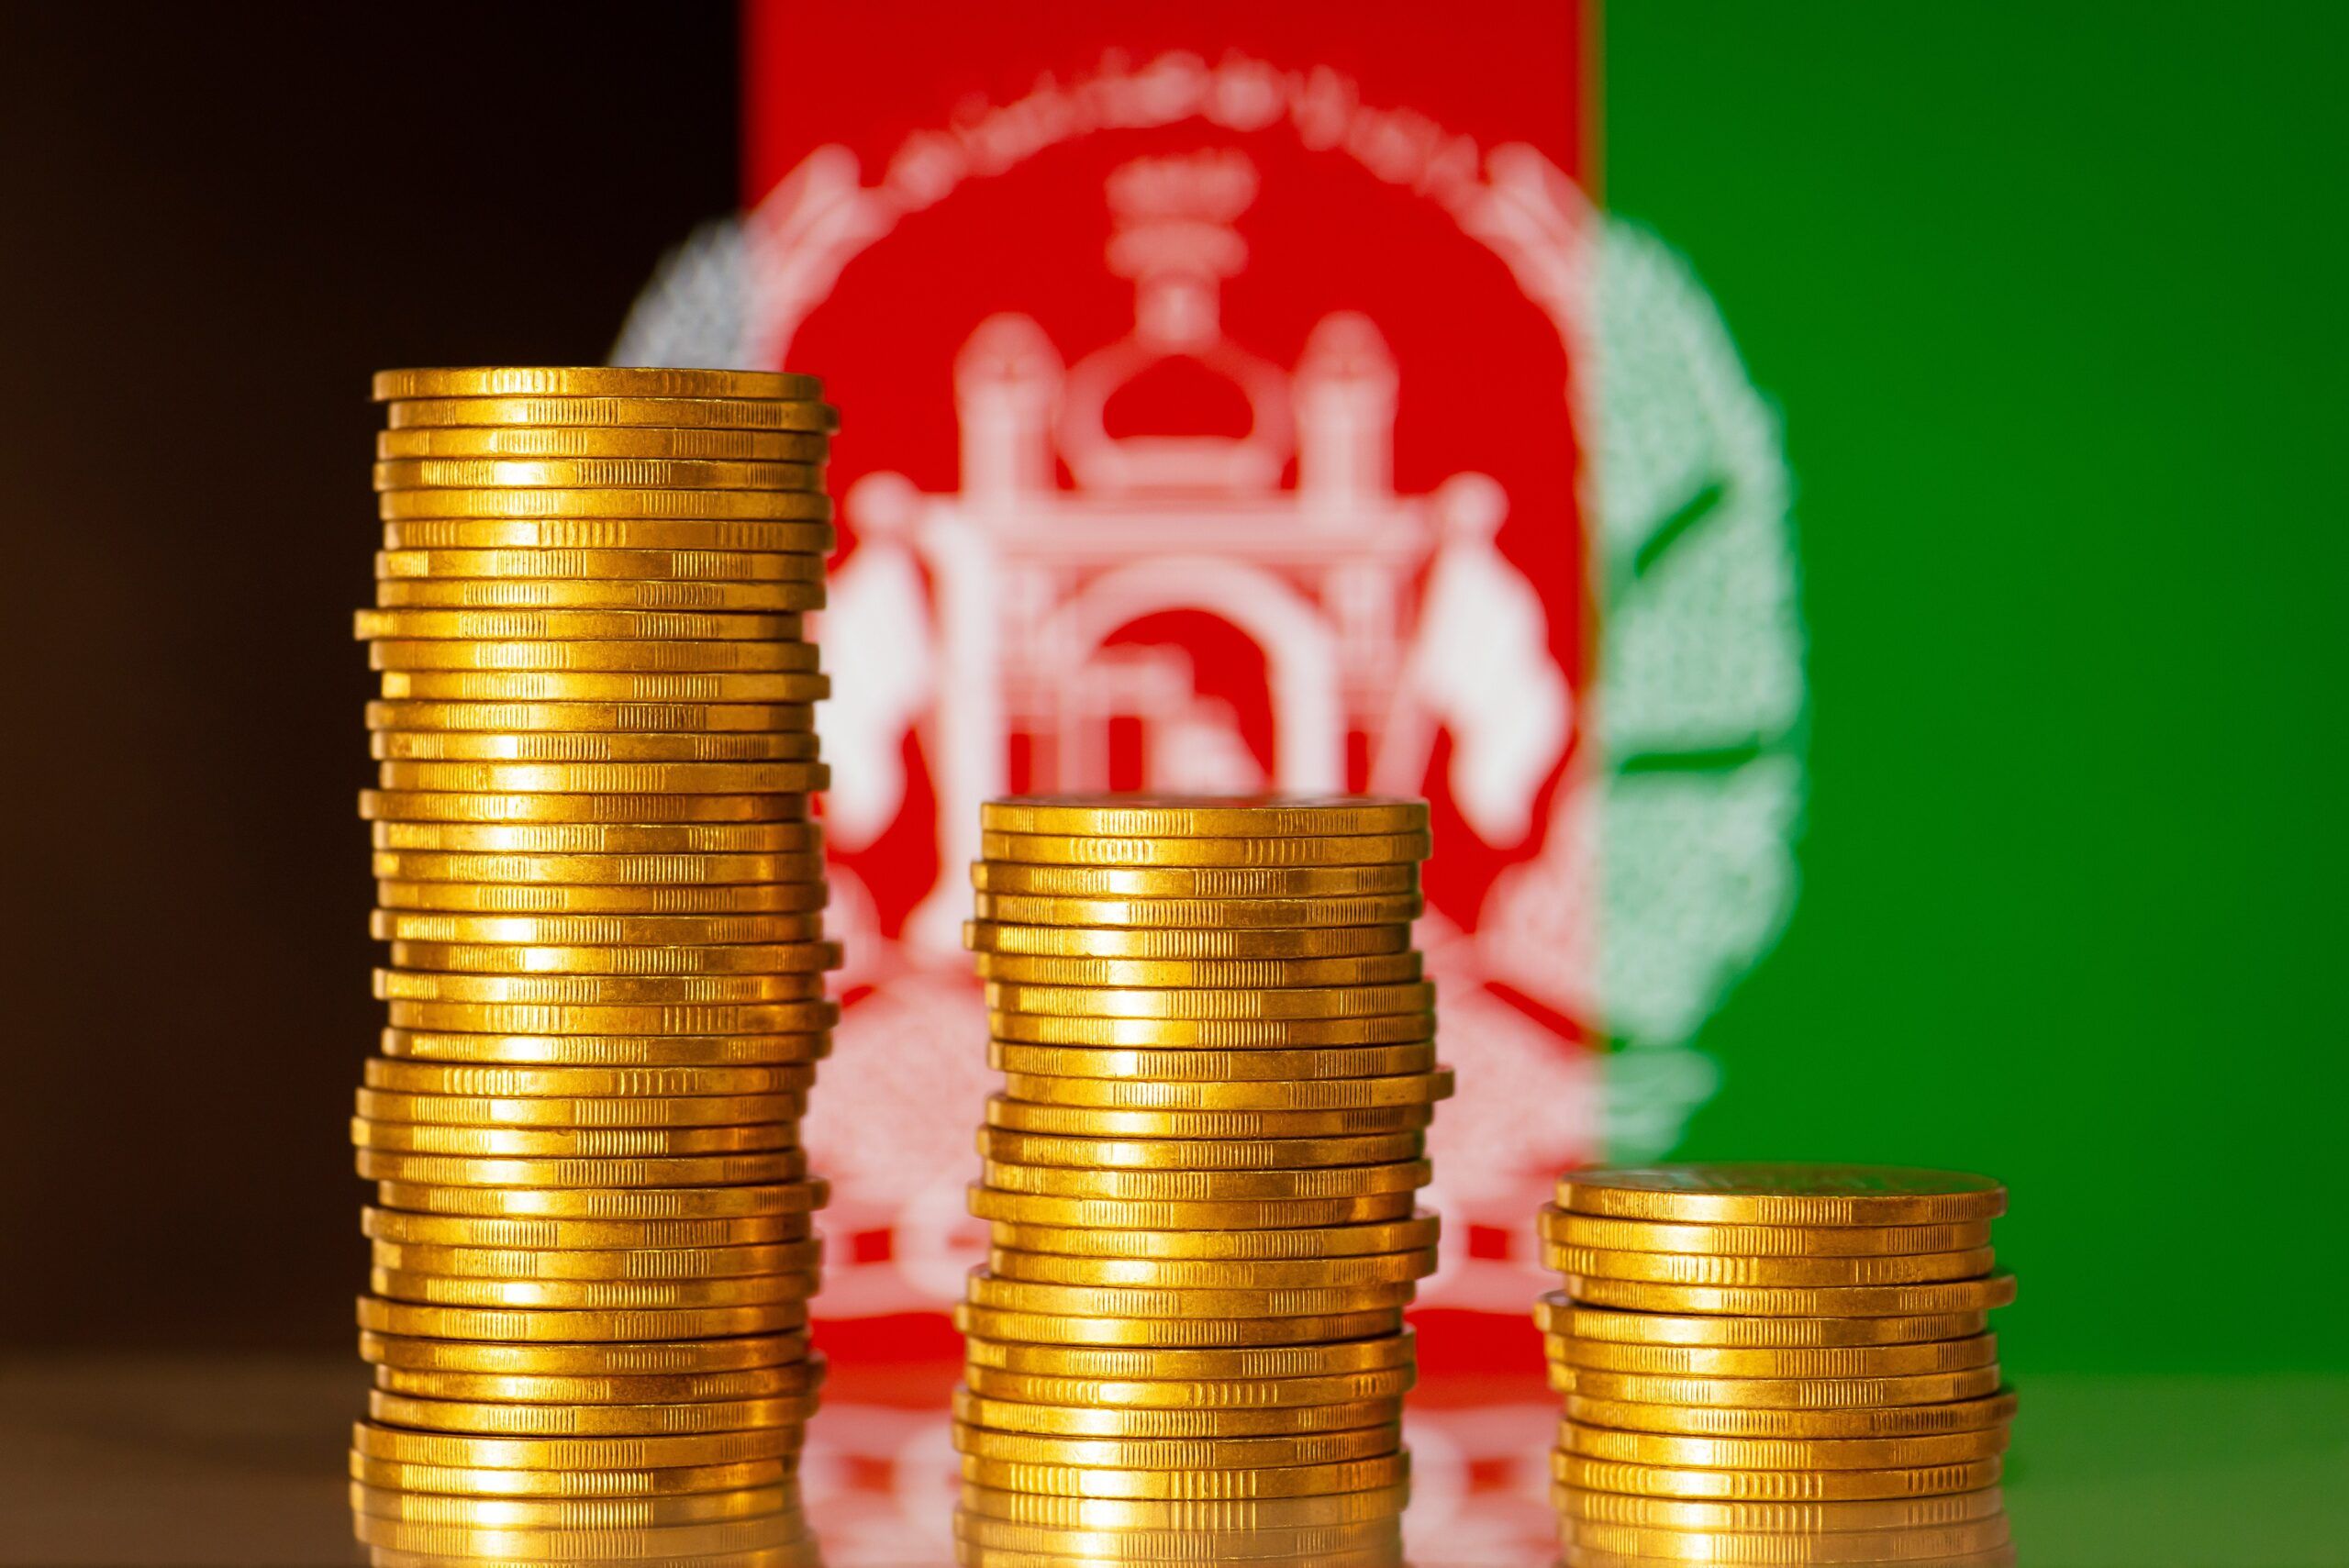 Stacks of gold coins in front of Afghanistan flag